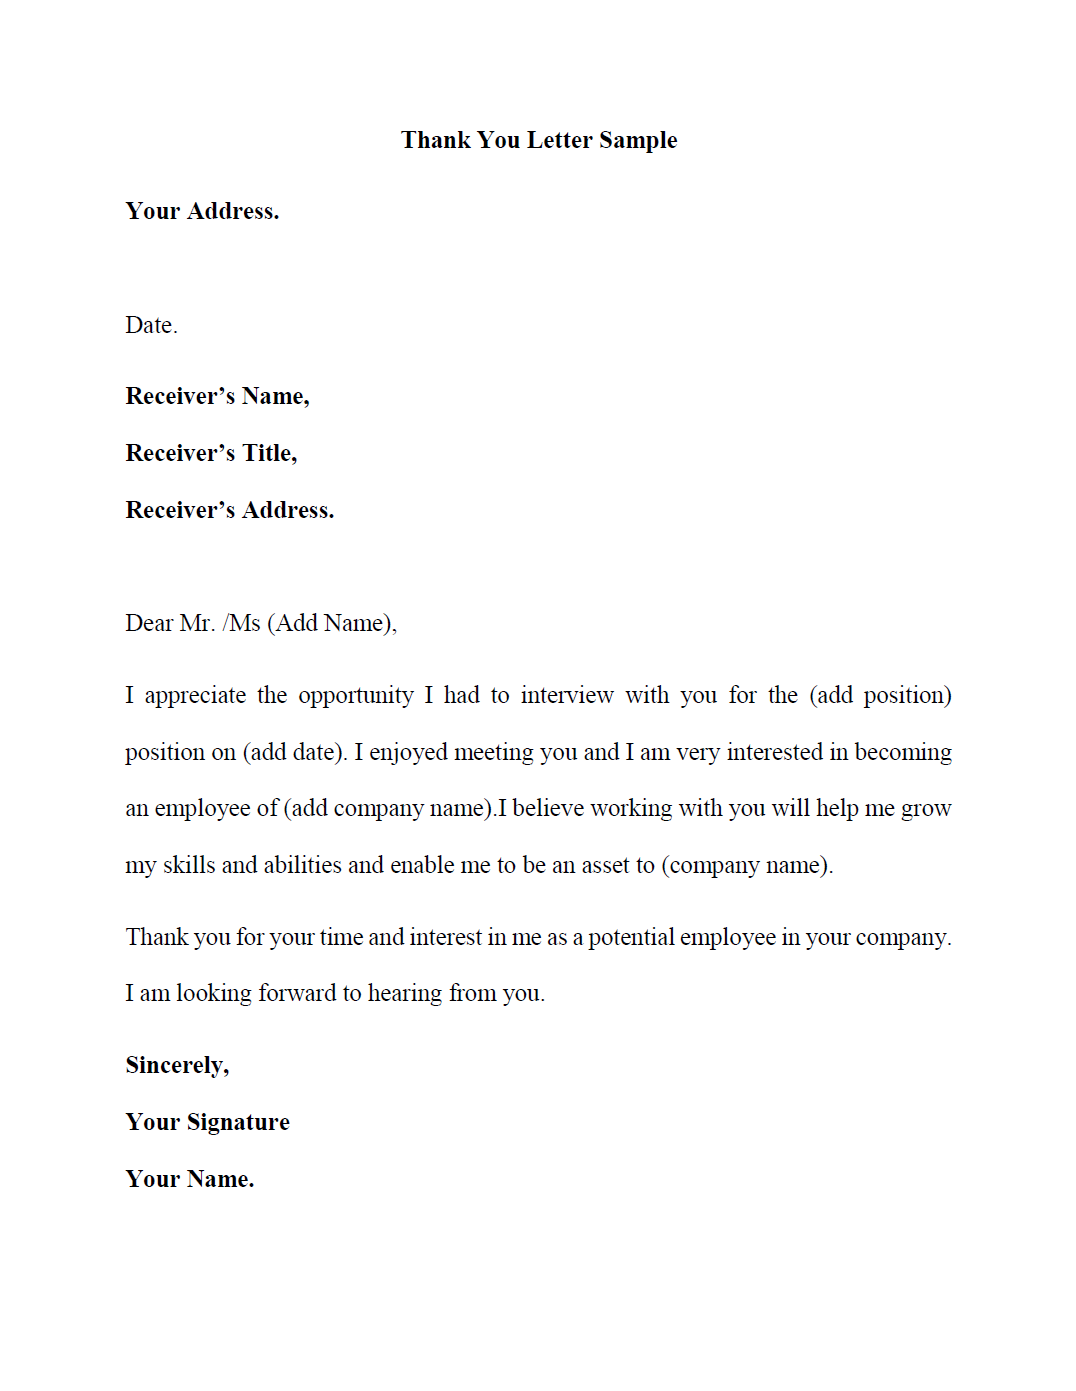 spectacular-tips-about-official-thank-you-letter-format-lab-assistant